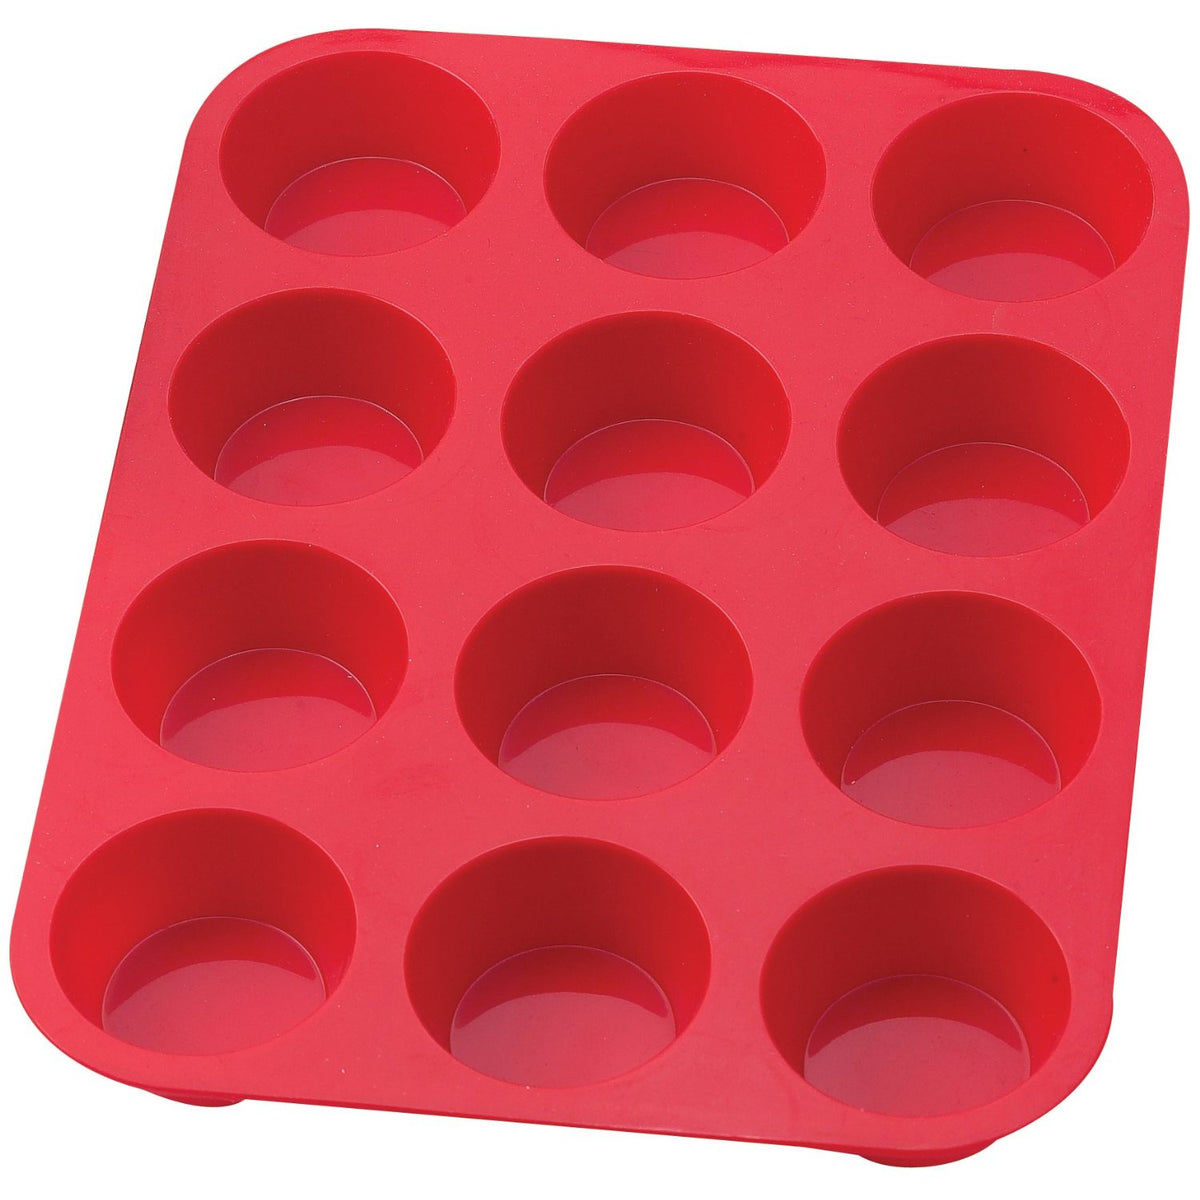 The Essentials 43630 Silicone Muffin Pan, 12 Cup, 13-1/2" x 10" x 1-1/4"